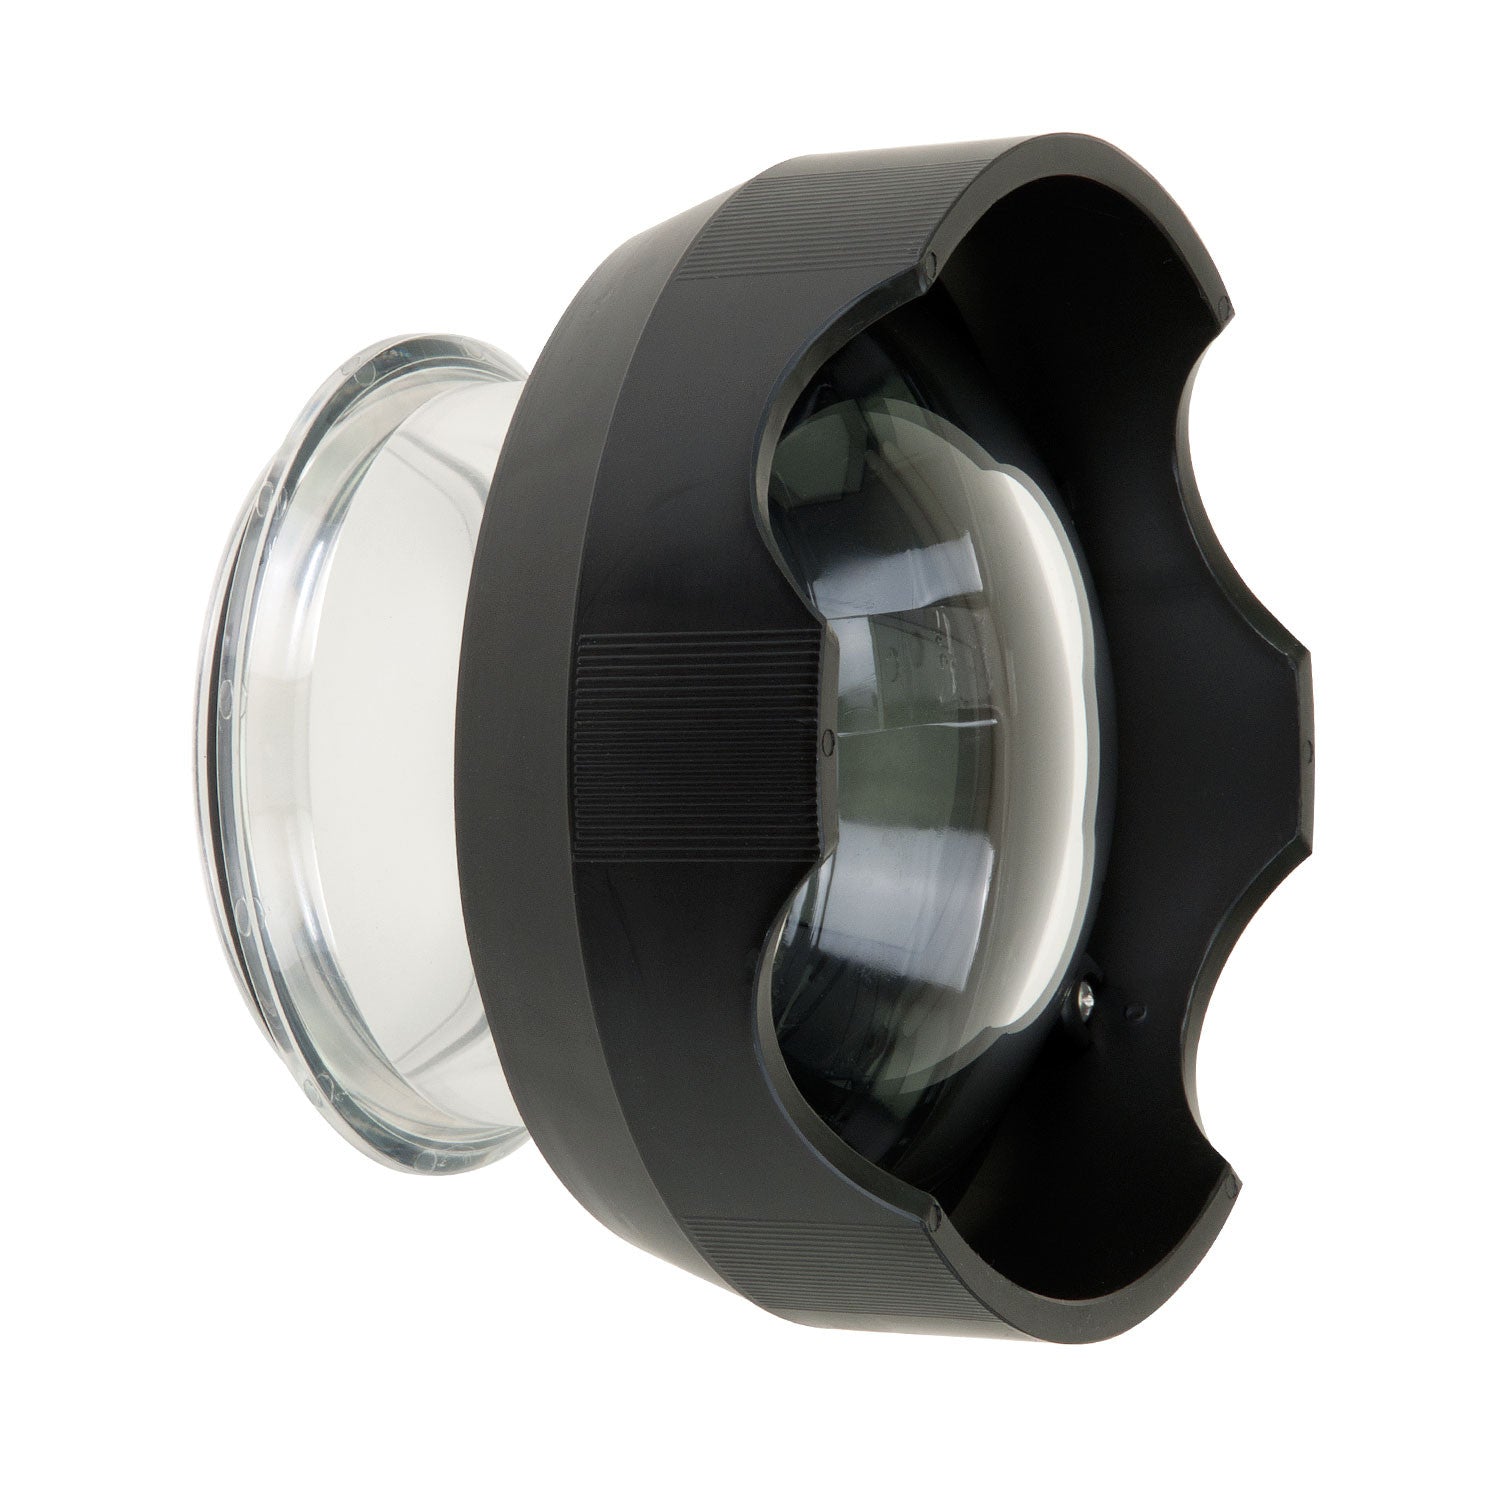 FL 6 inch Dome for Lenses Up To 4 Inches